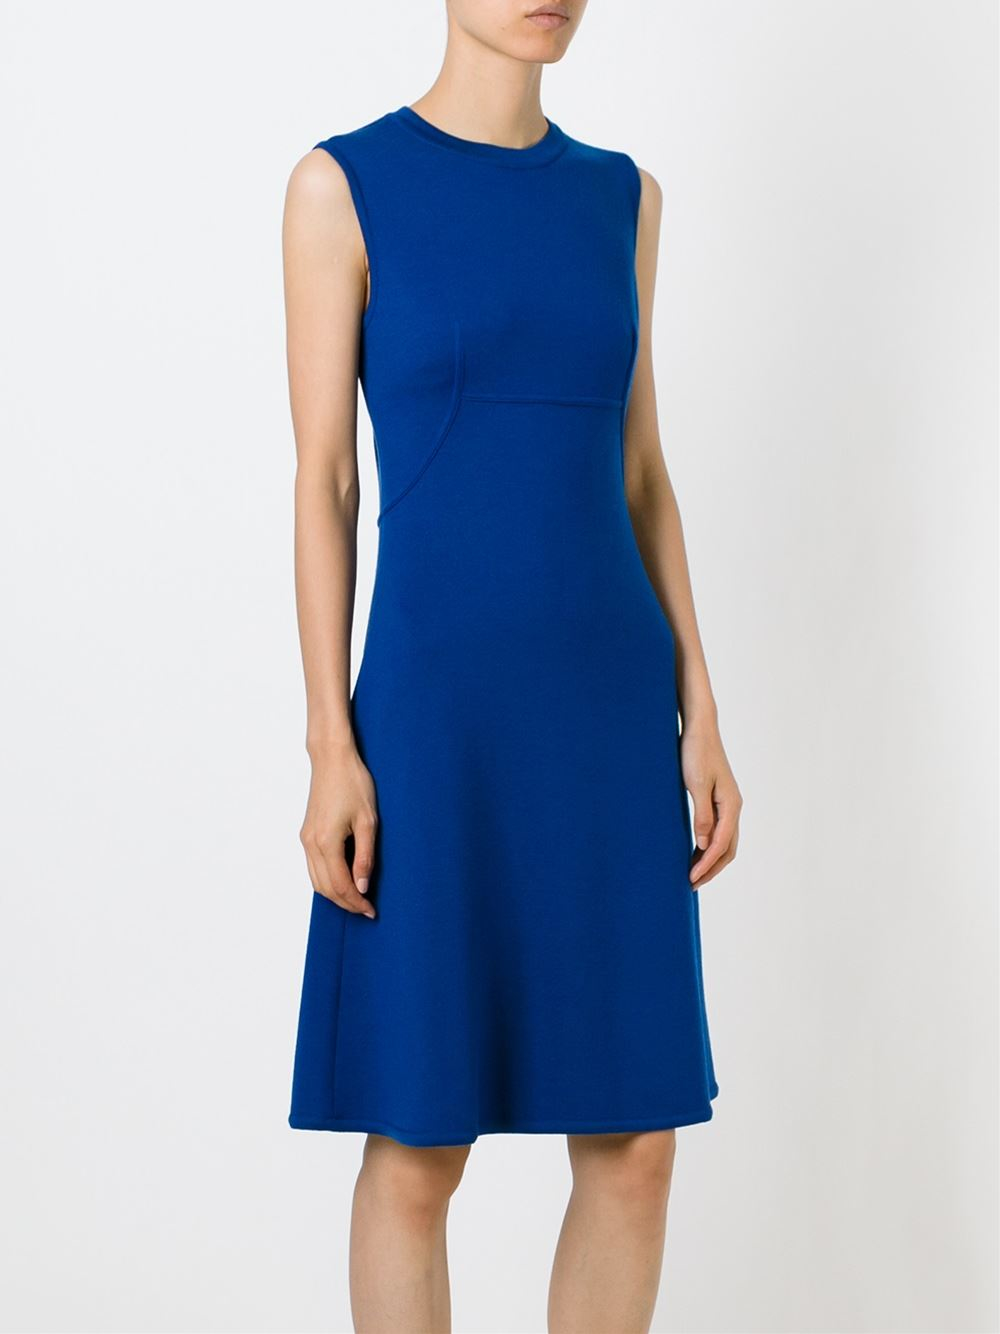 Ermanno Scervino Sleeveless Knit Dress in Blue - Lyst